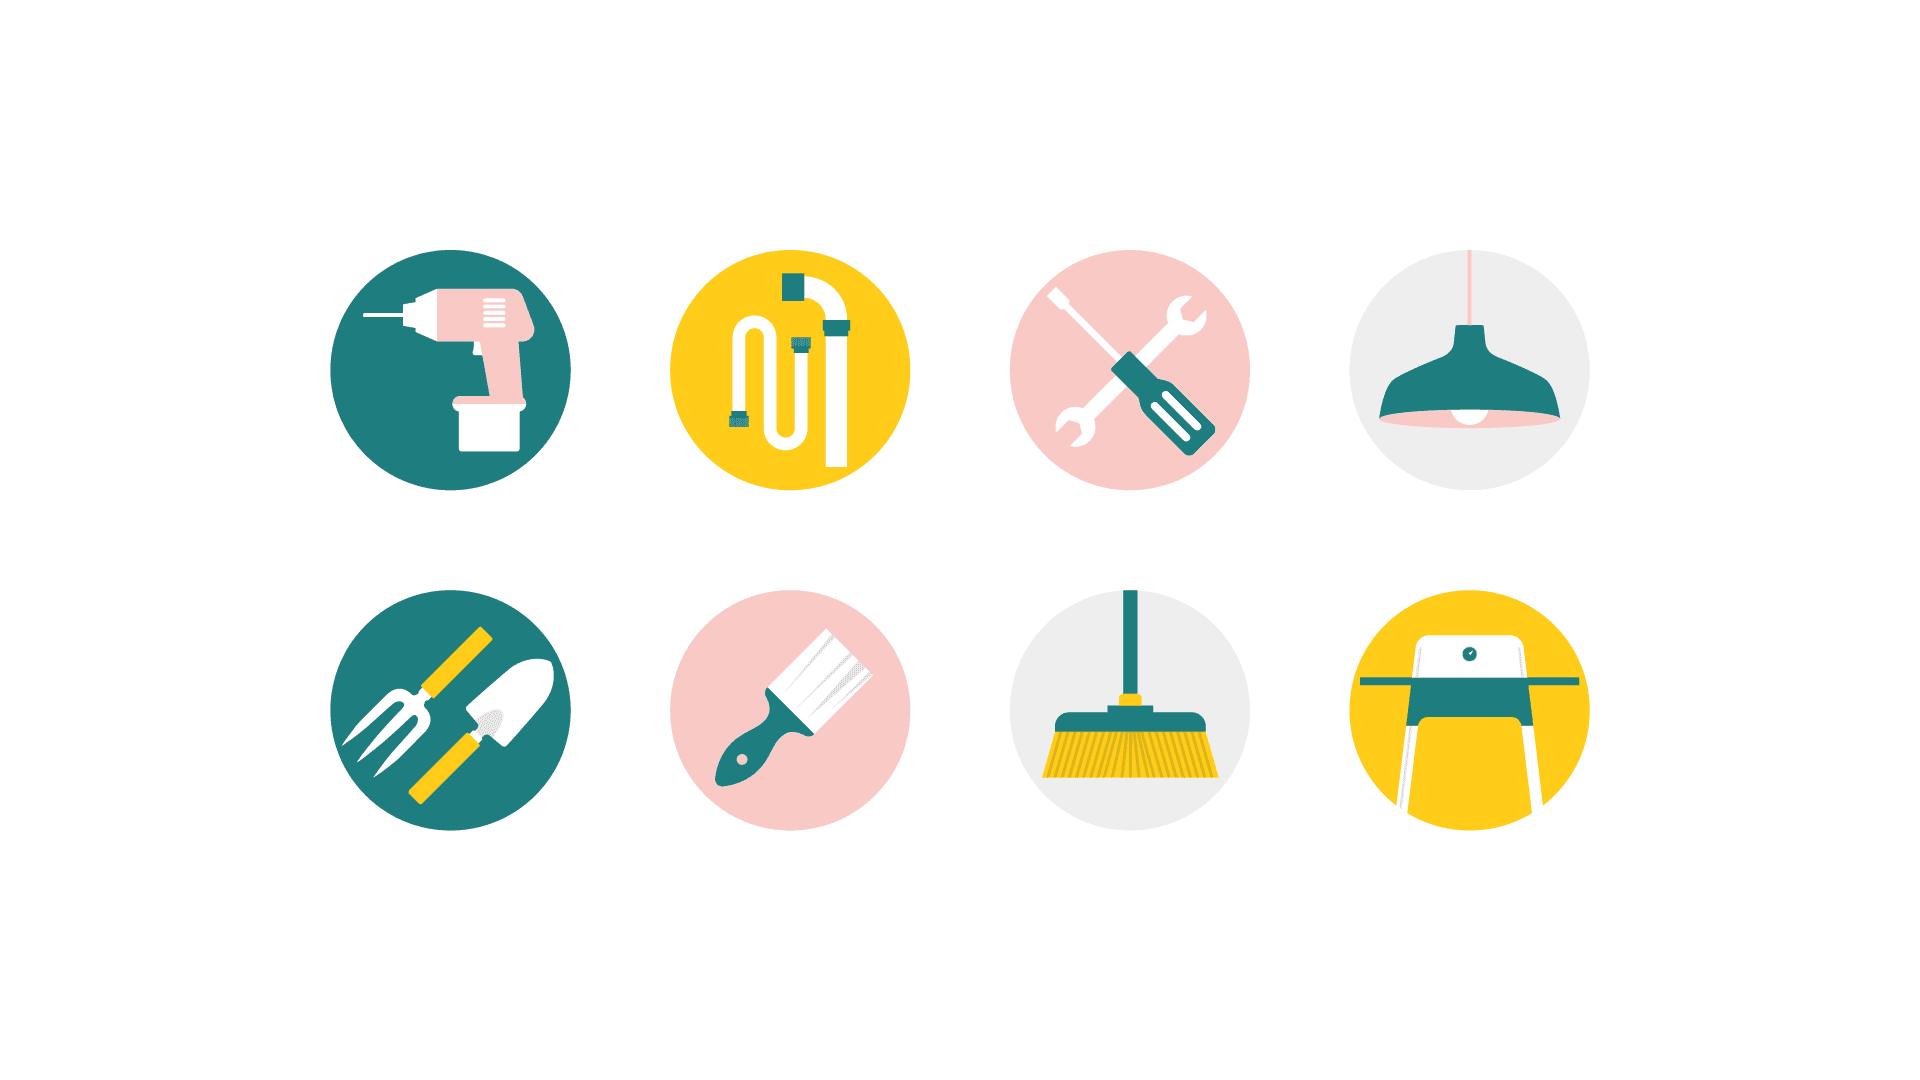 Animated icon badges for home and hardware categories